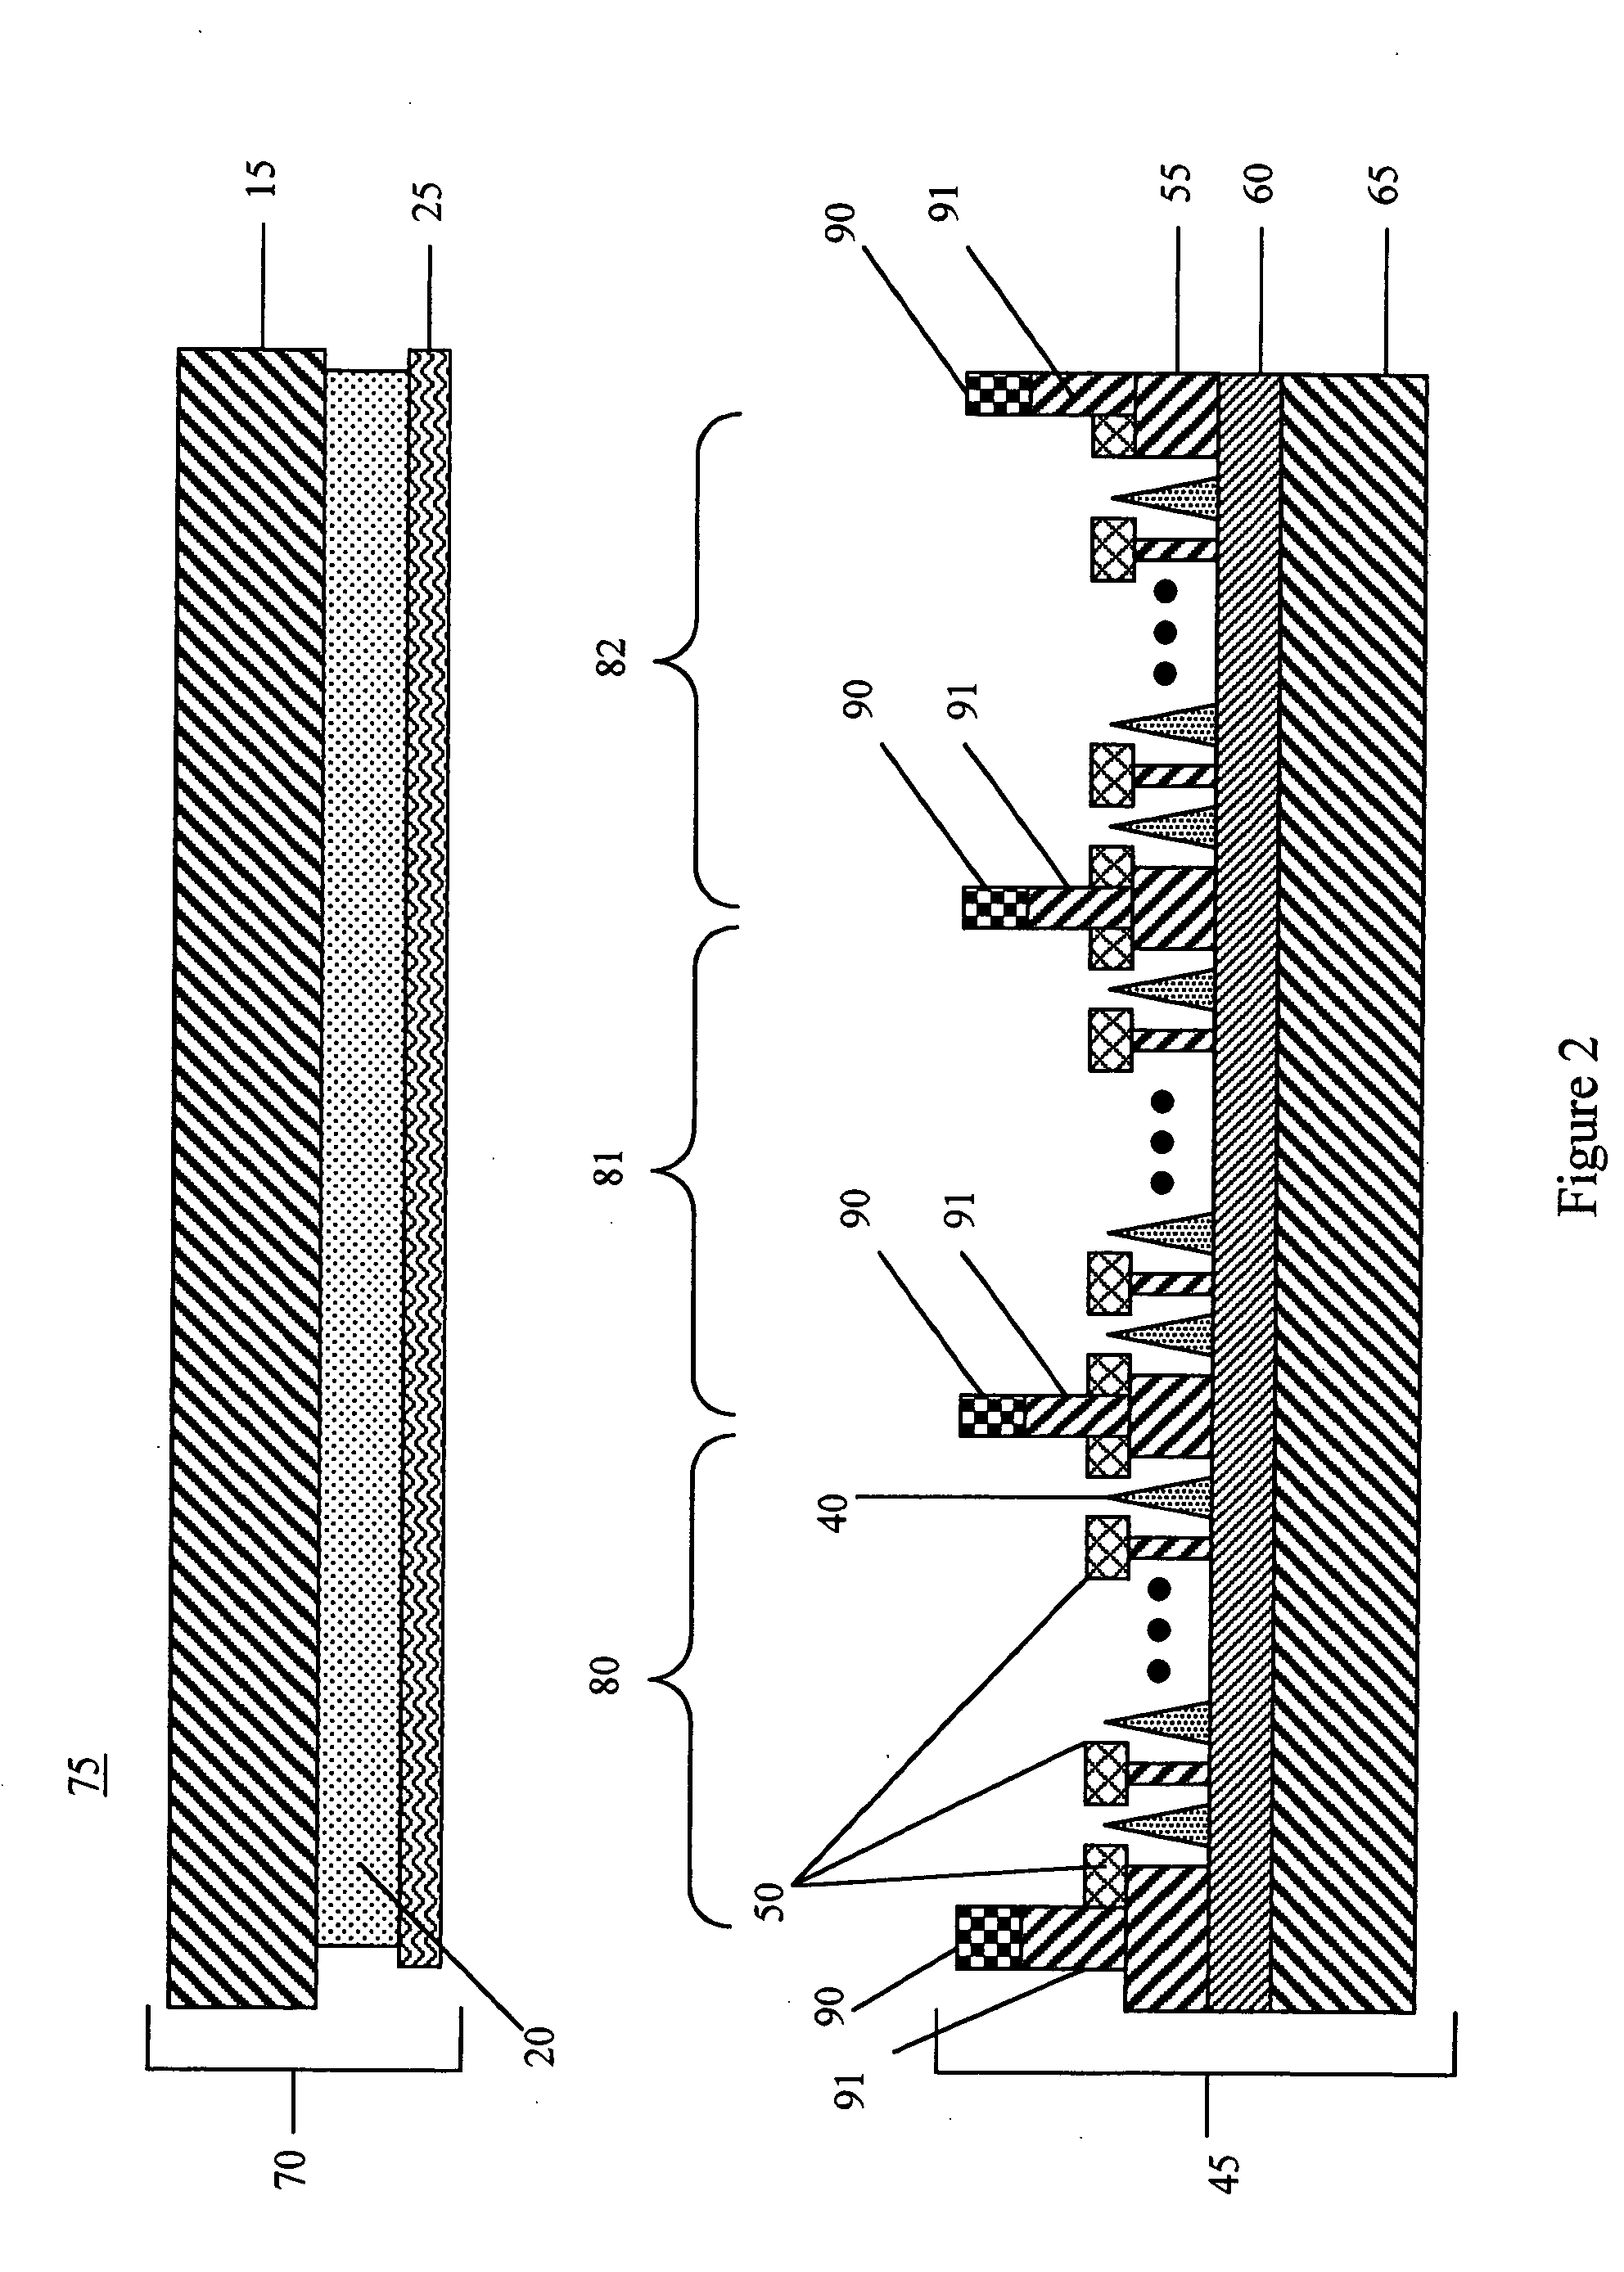 System and method for recalibrating flat panel field emission displays